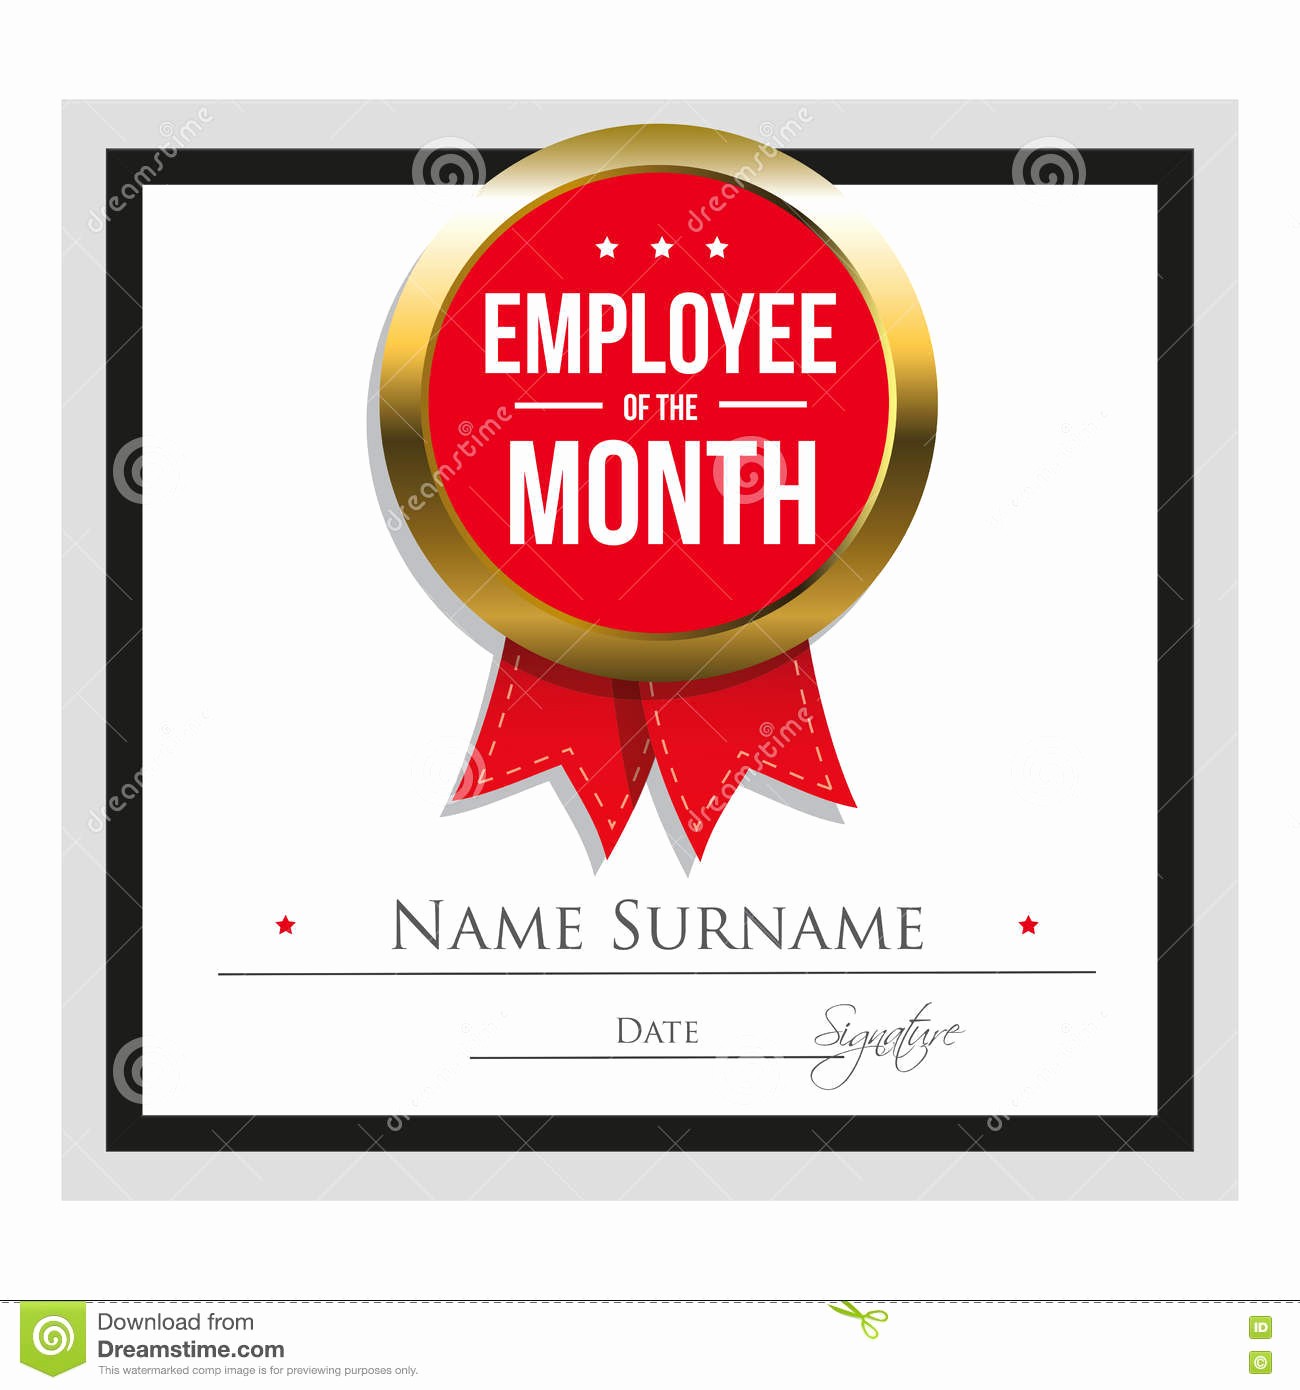 Employee Of the Month Sample New Employee the Month Certificate Template Stock Vector